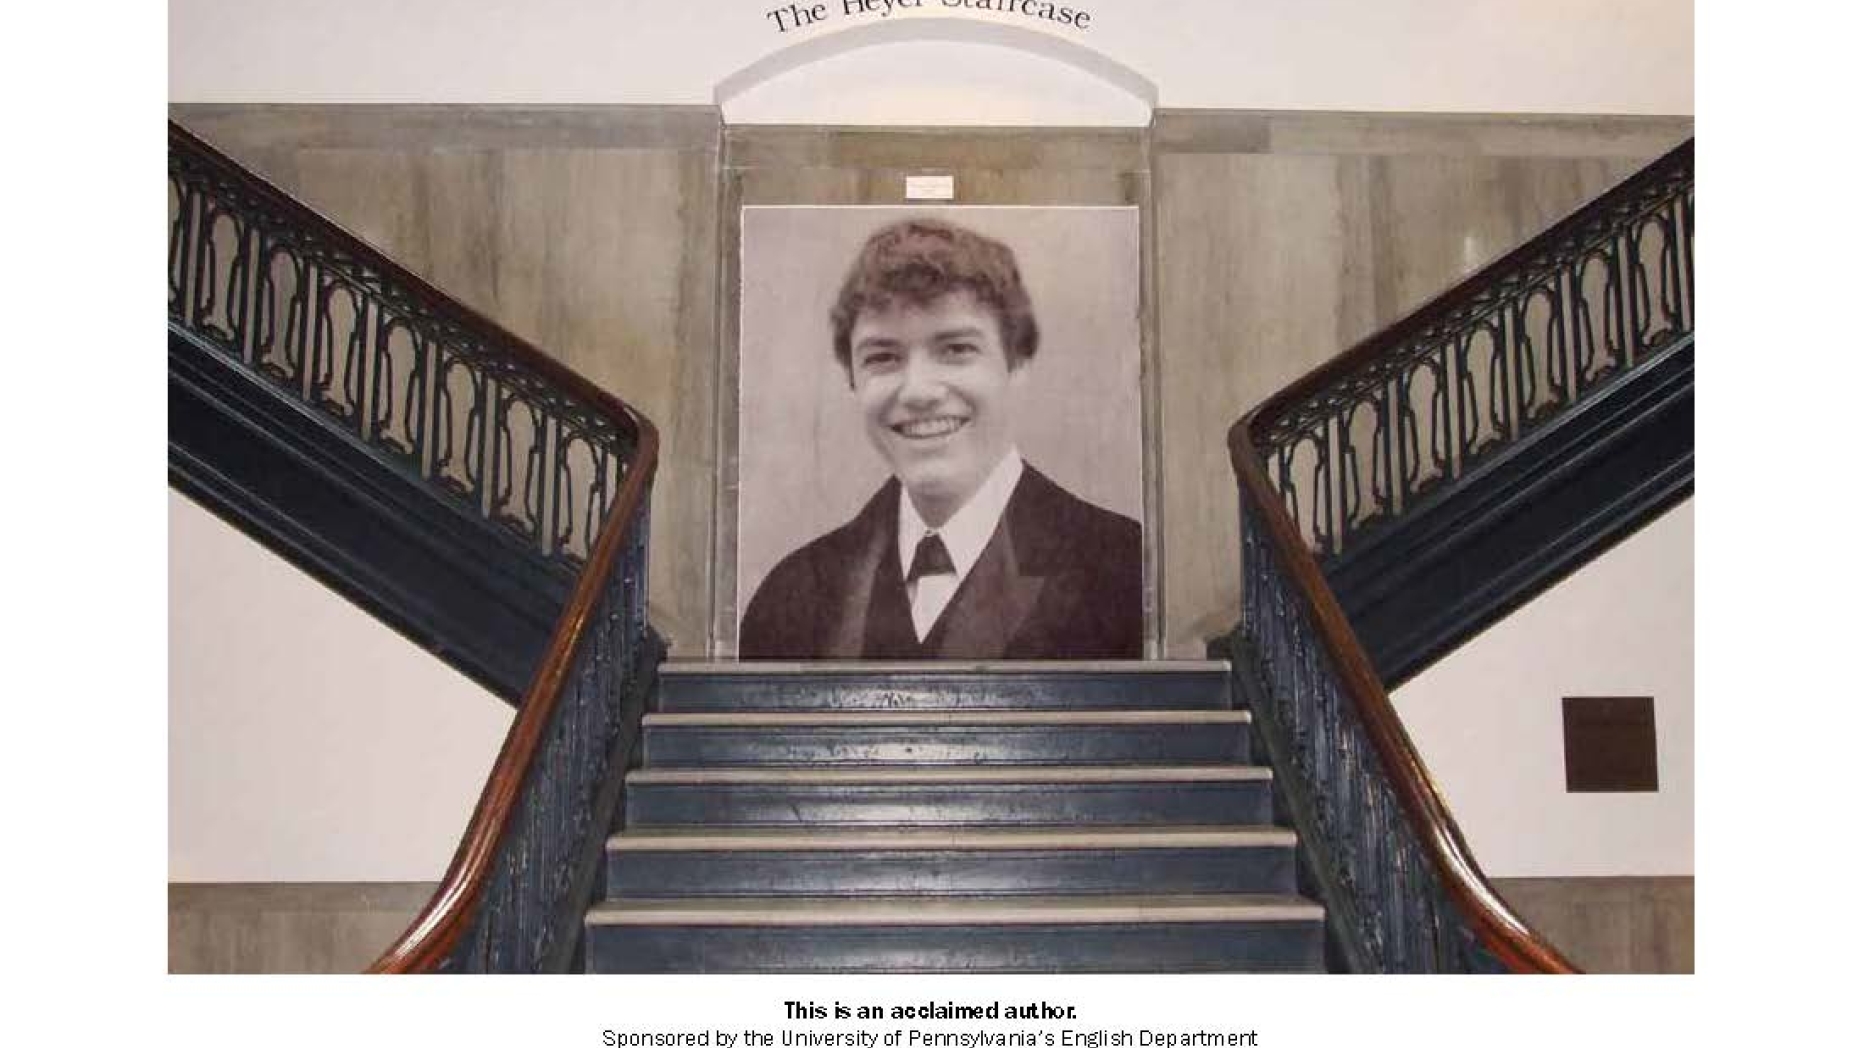 Installation piece where a large black and white photo of a young man has been place at the center of a staircase. Above the photo in and archway is the text "The Heyer Staircase"